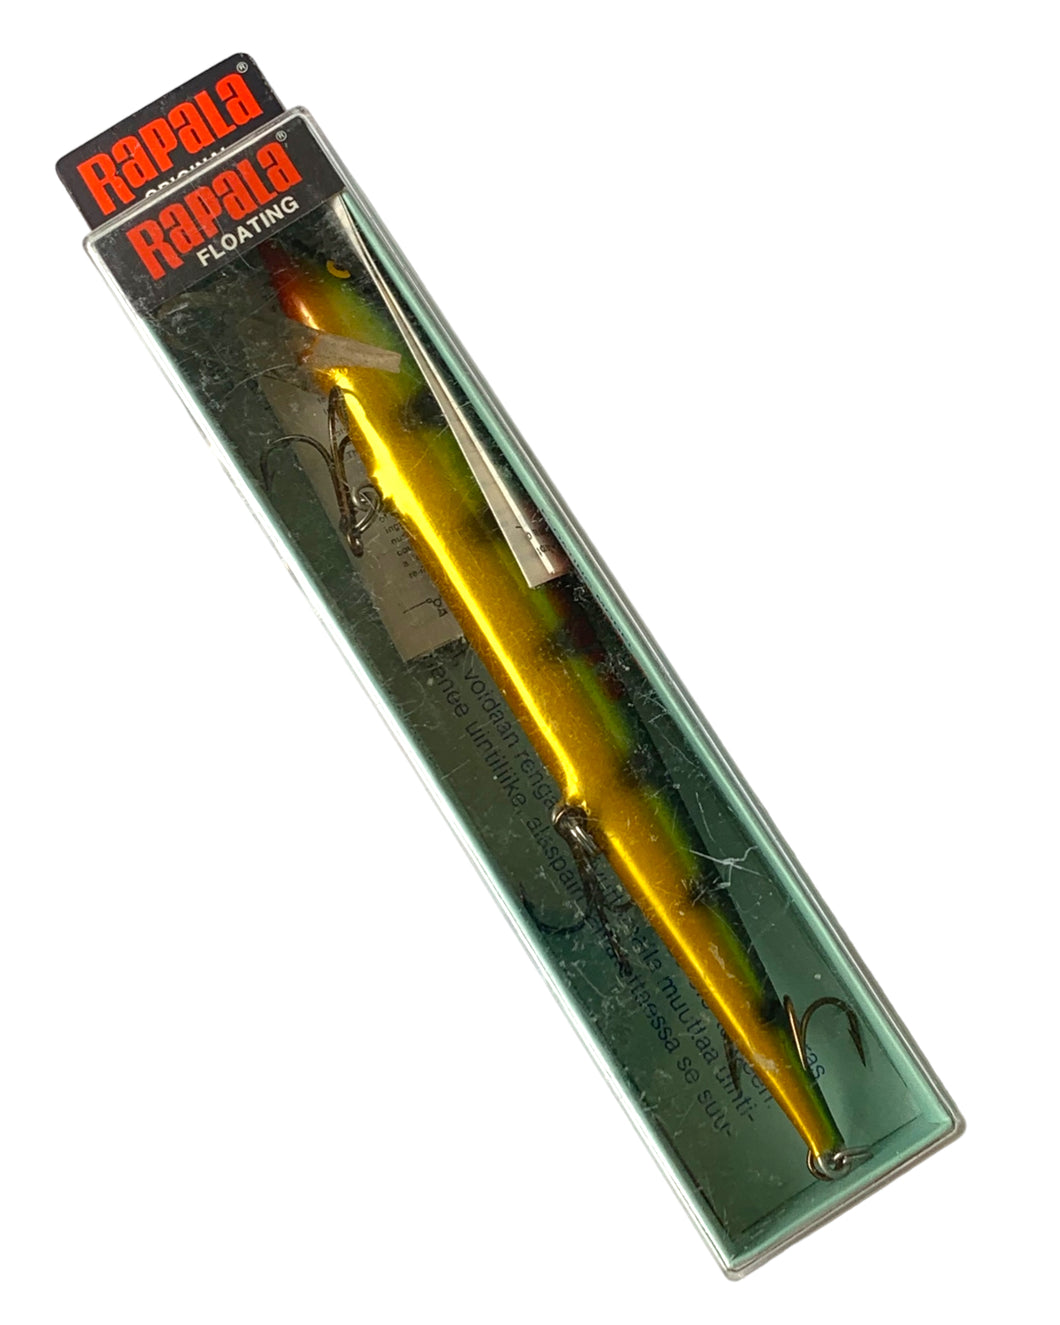 Boxed View of RAPALA ORIGINAL FLOATING 18 (F-18) Fishing Lure in Perch. Finland Made. Only at Toad Tackle.